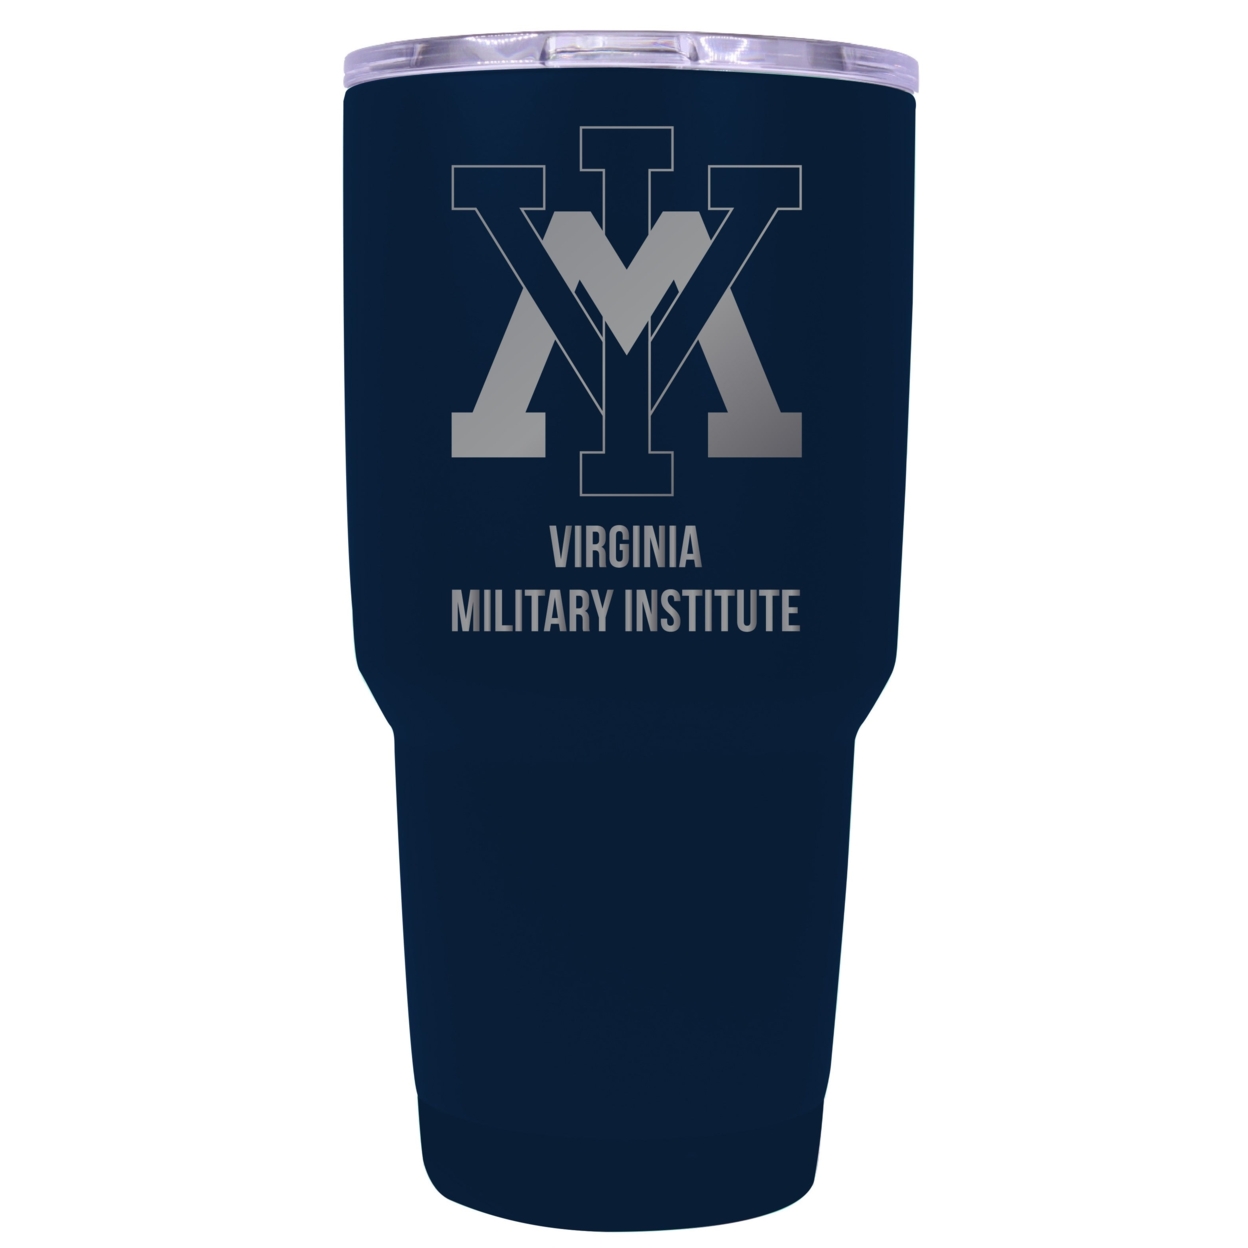 VMI Keydets 24 Oz Laser Engraved Stainless Steel Insulated Tumbler - Choose Your Color. - Red